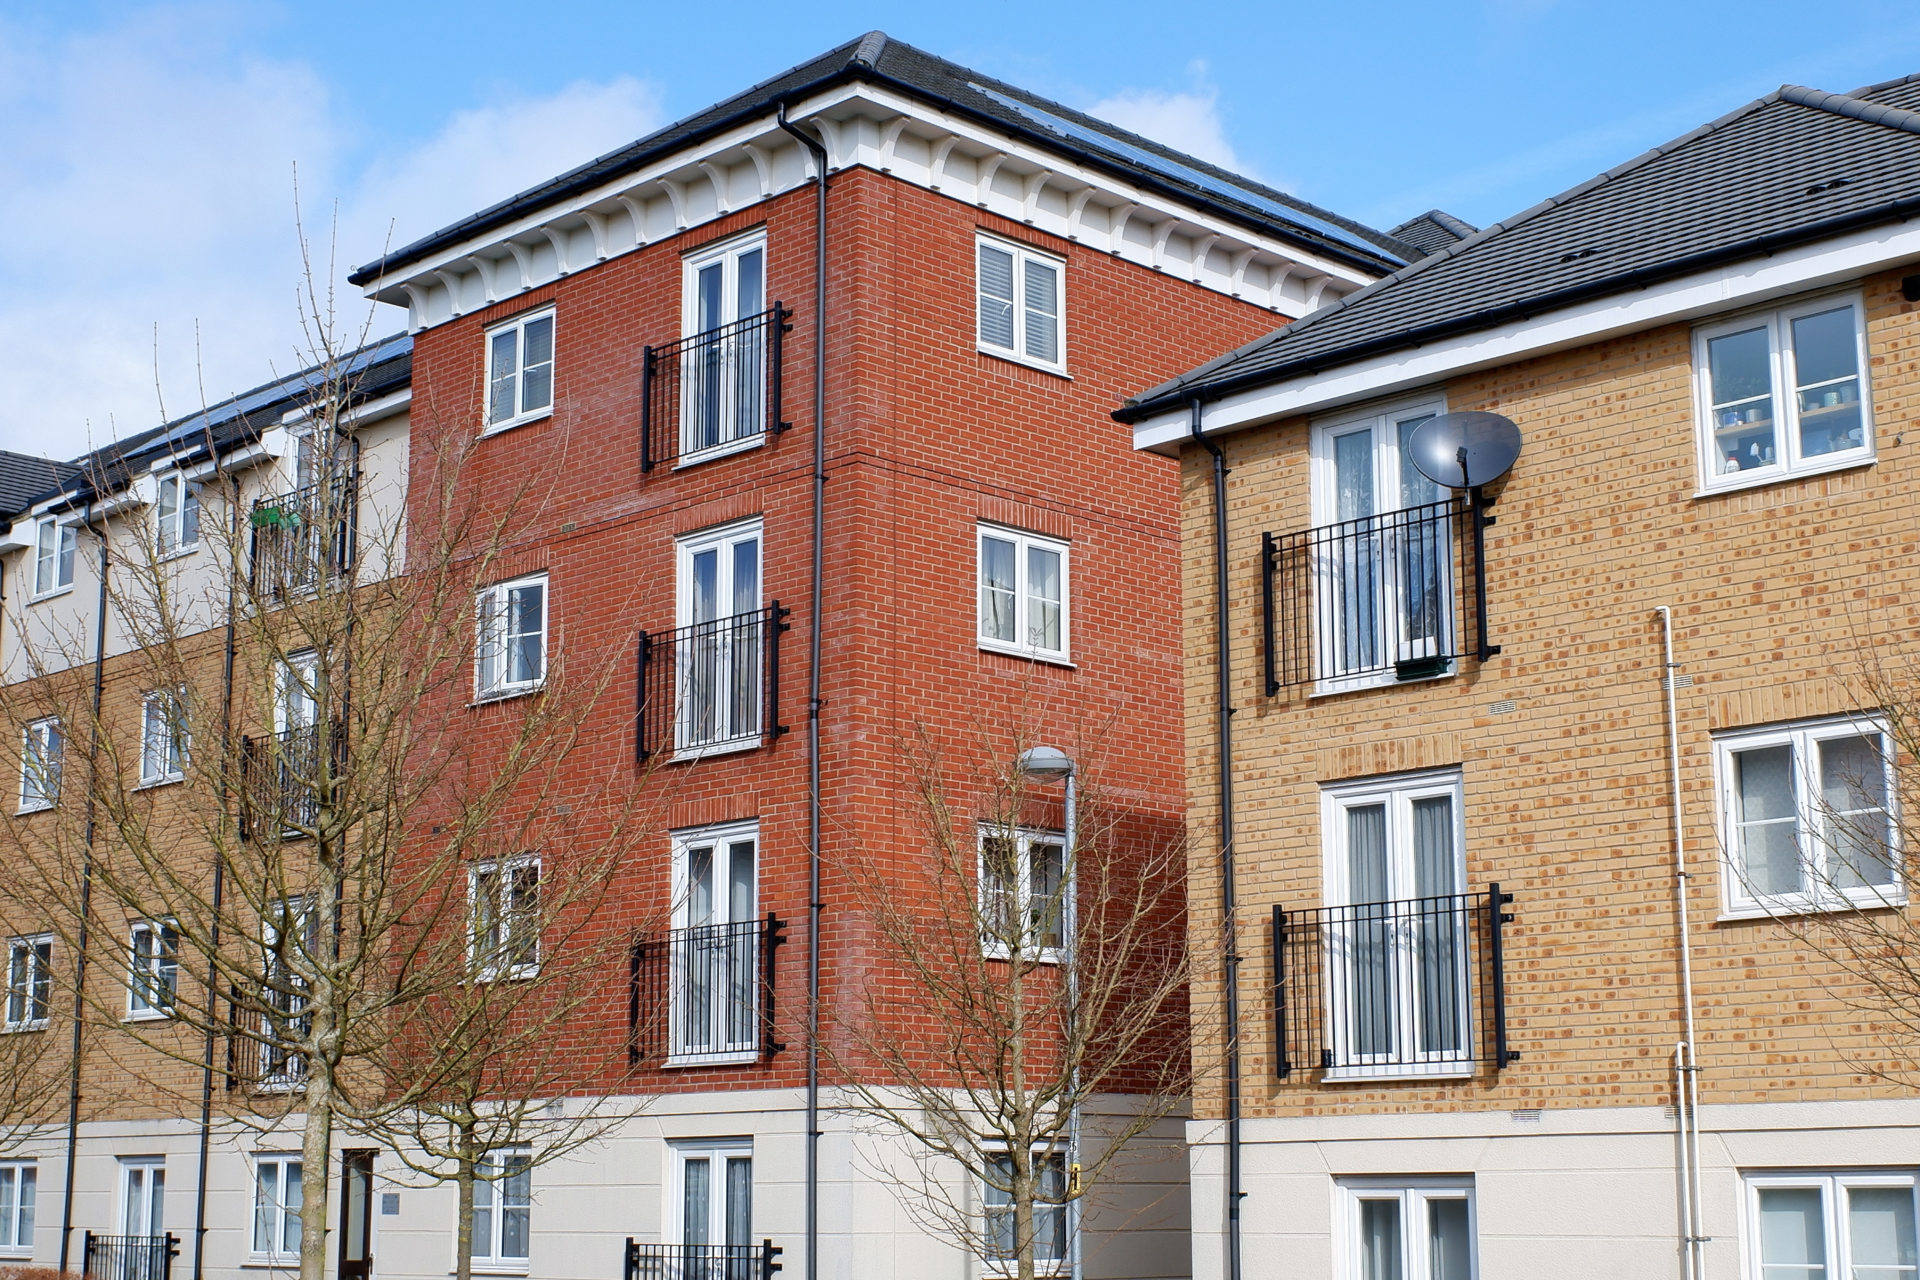 Do I own my flat if it’s leasehold?